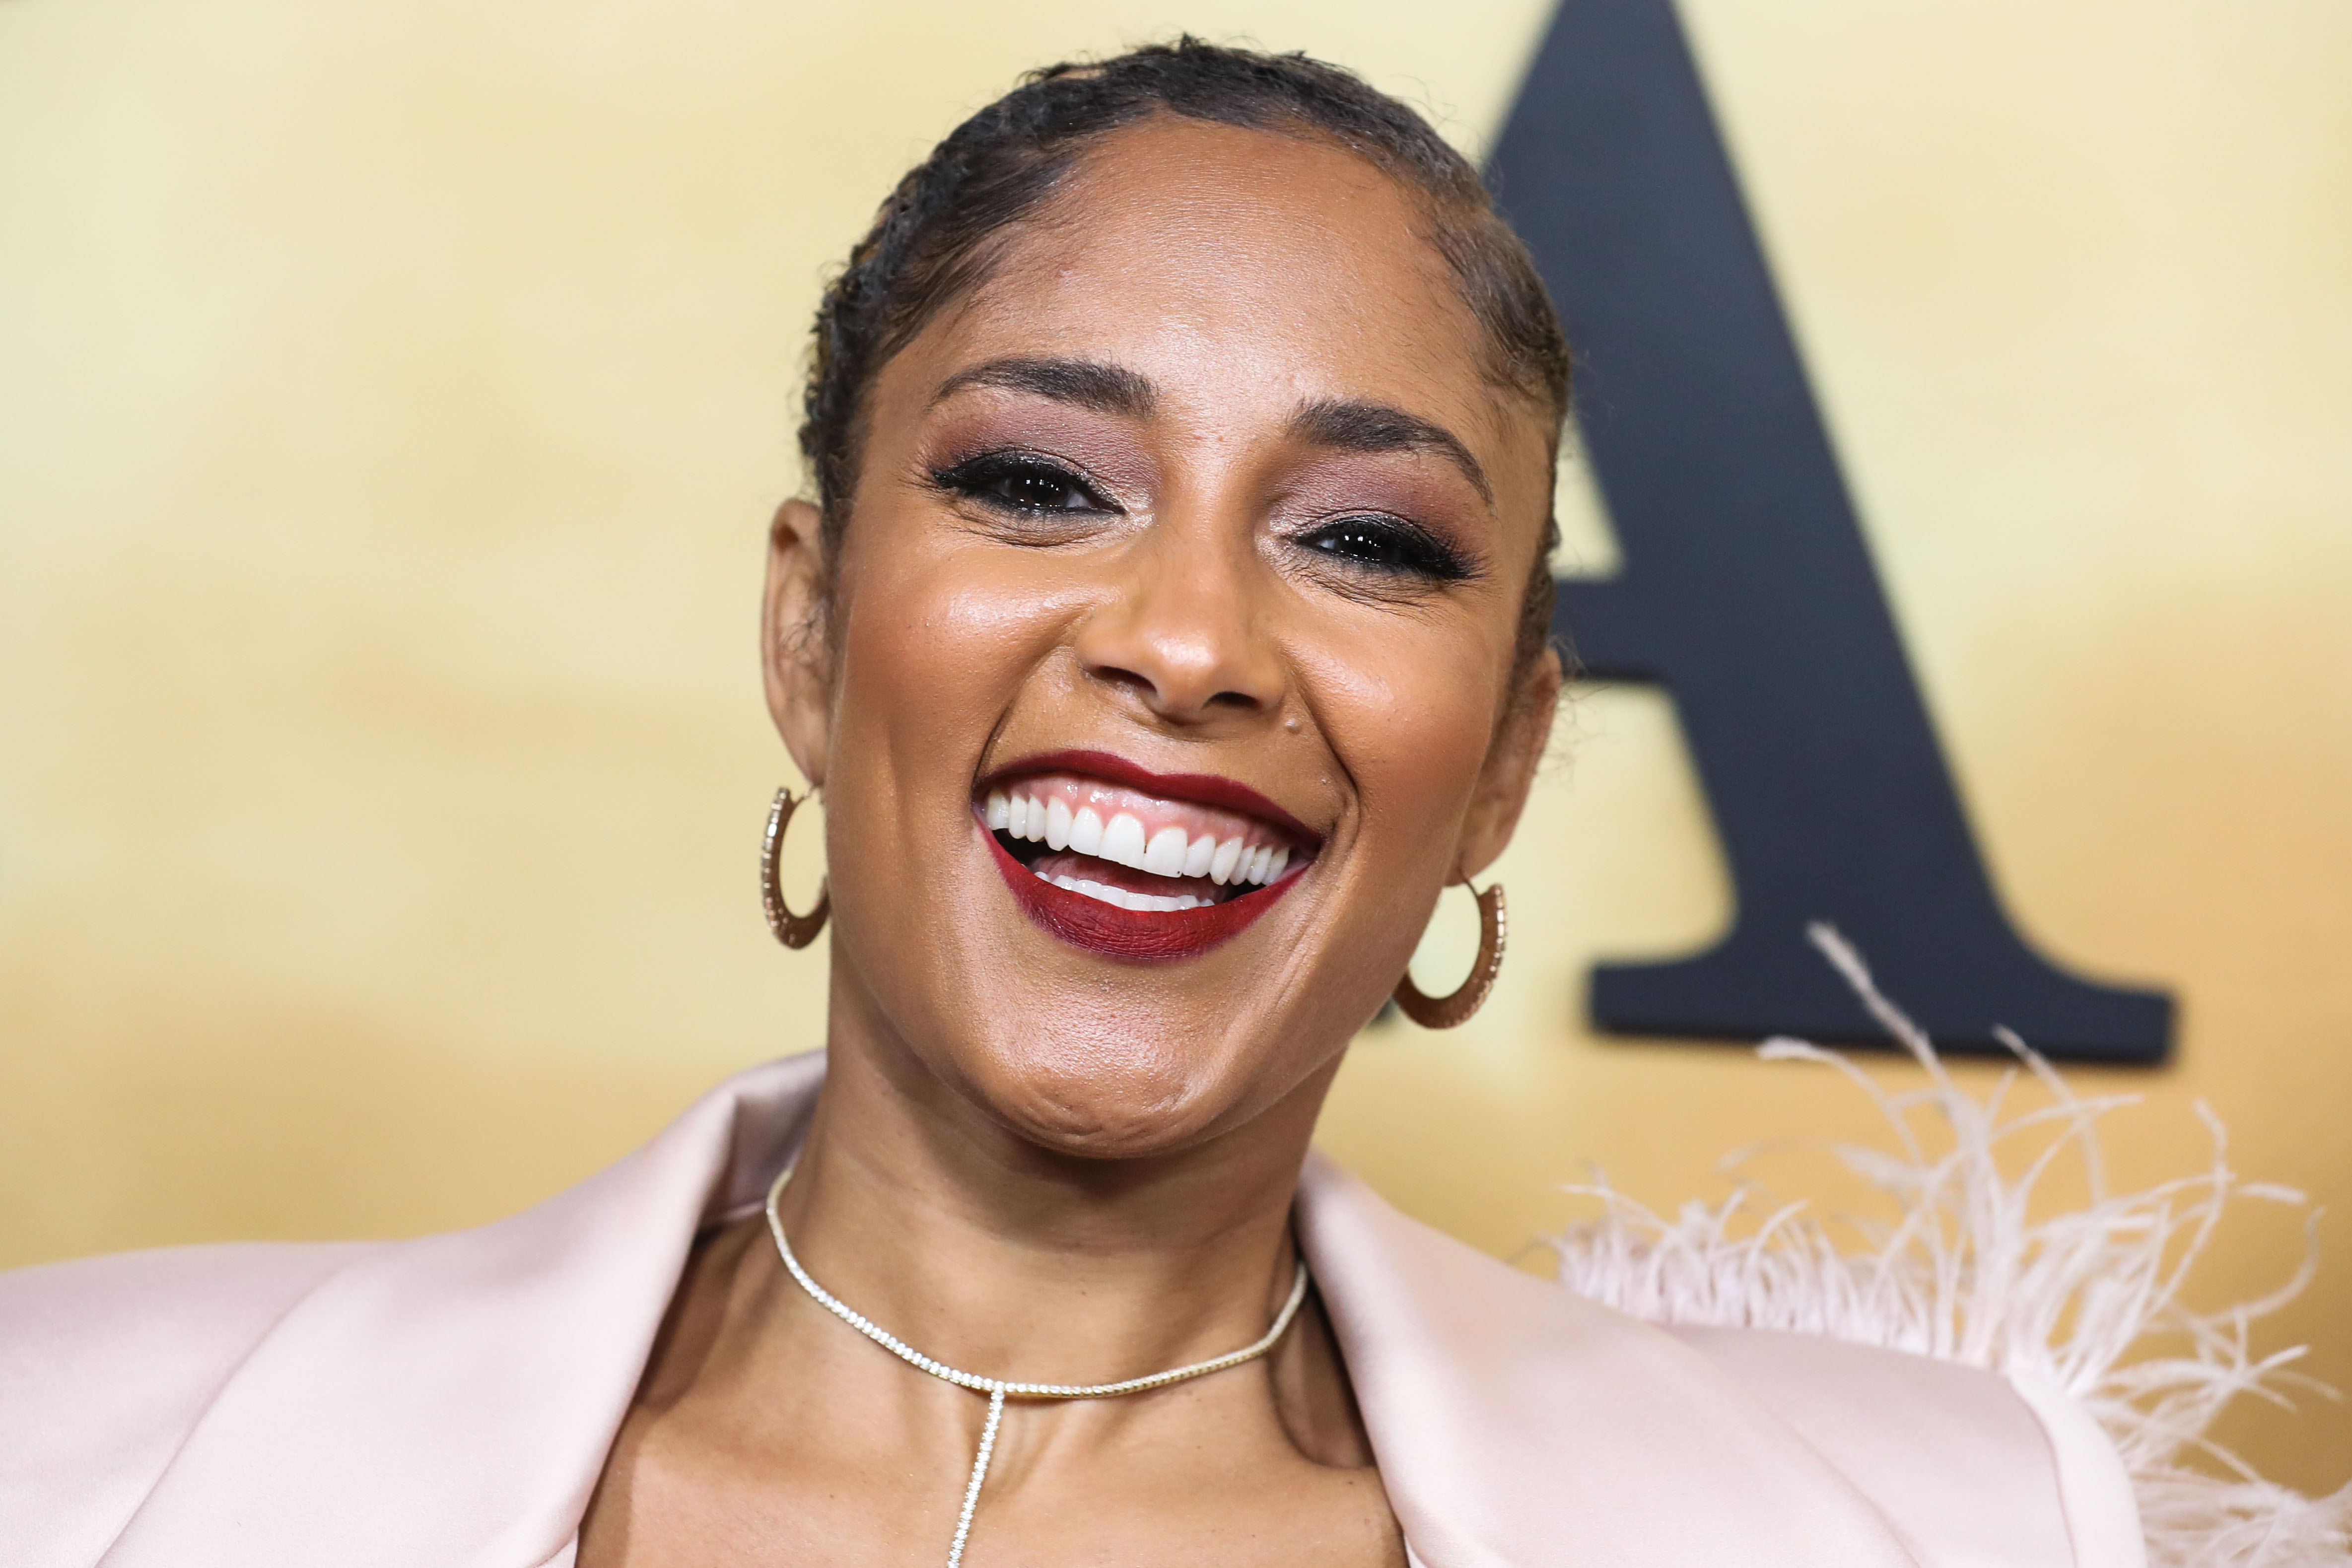 Amanda Seales arrives at the Los Angeles Premiere Of Focus Features' 'Harriet' held at The Orpheum Theatre on October 29, 2019 in Los Angeles, California, United States.